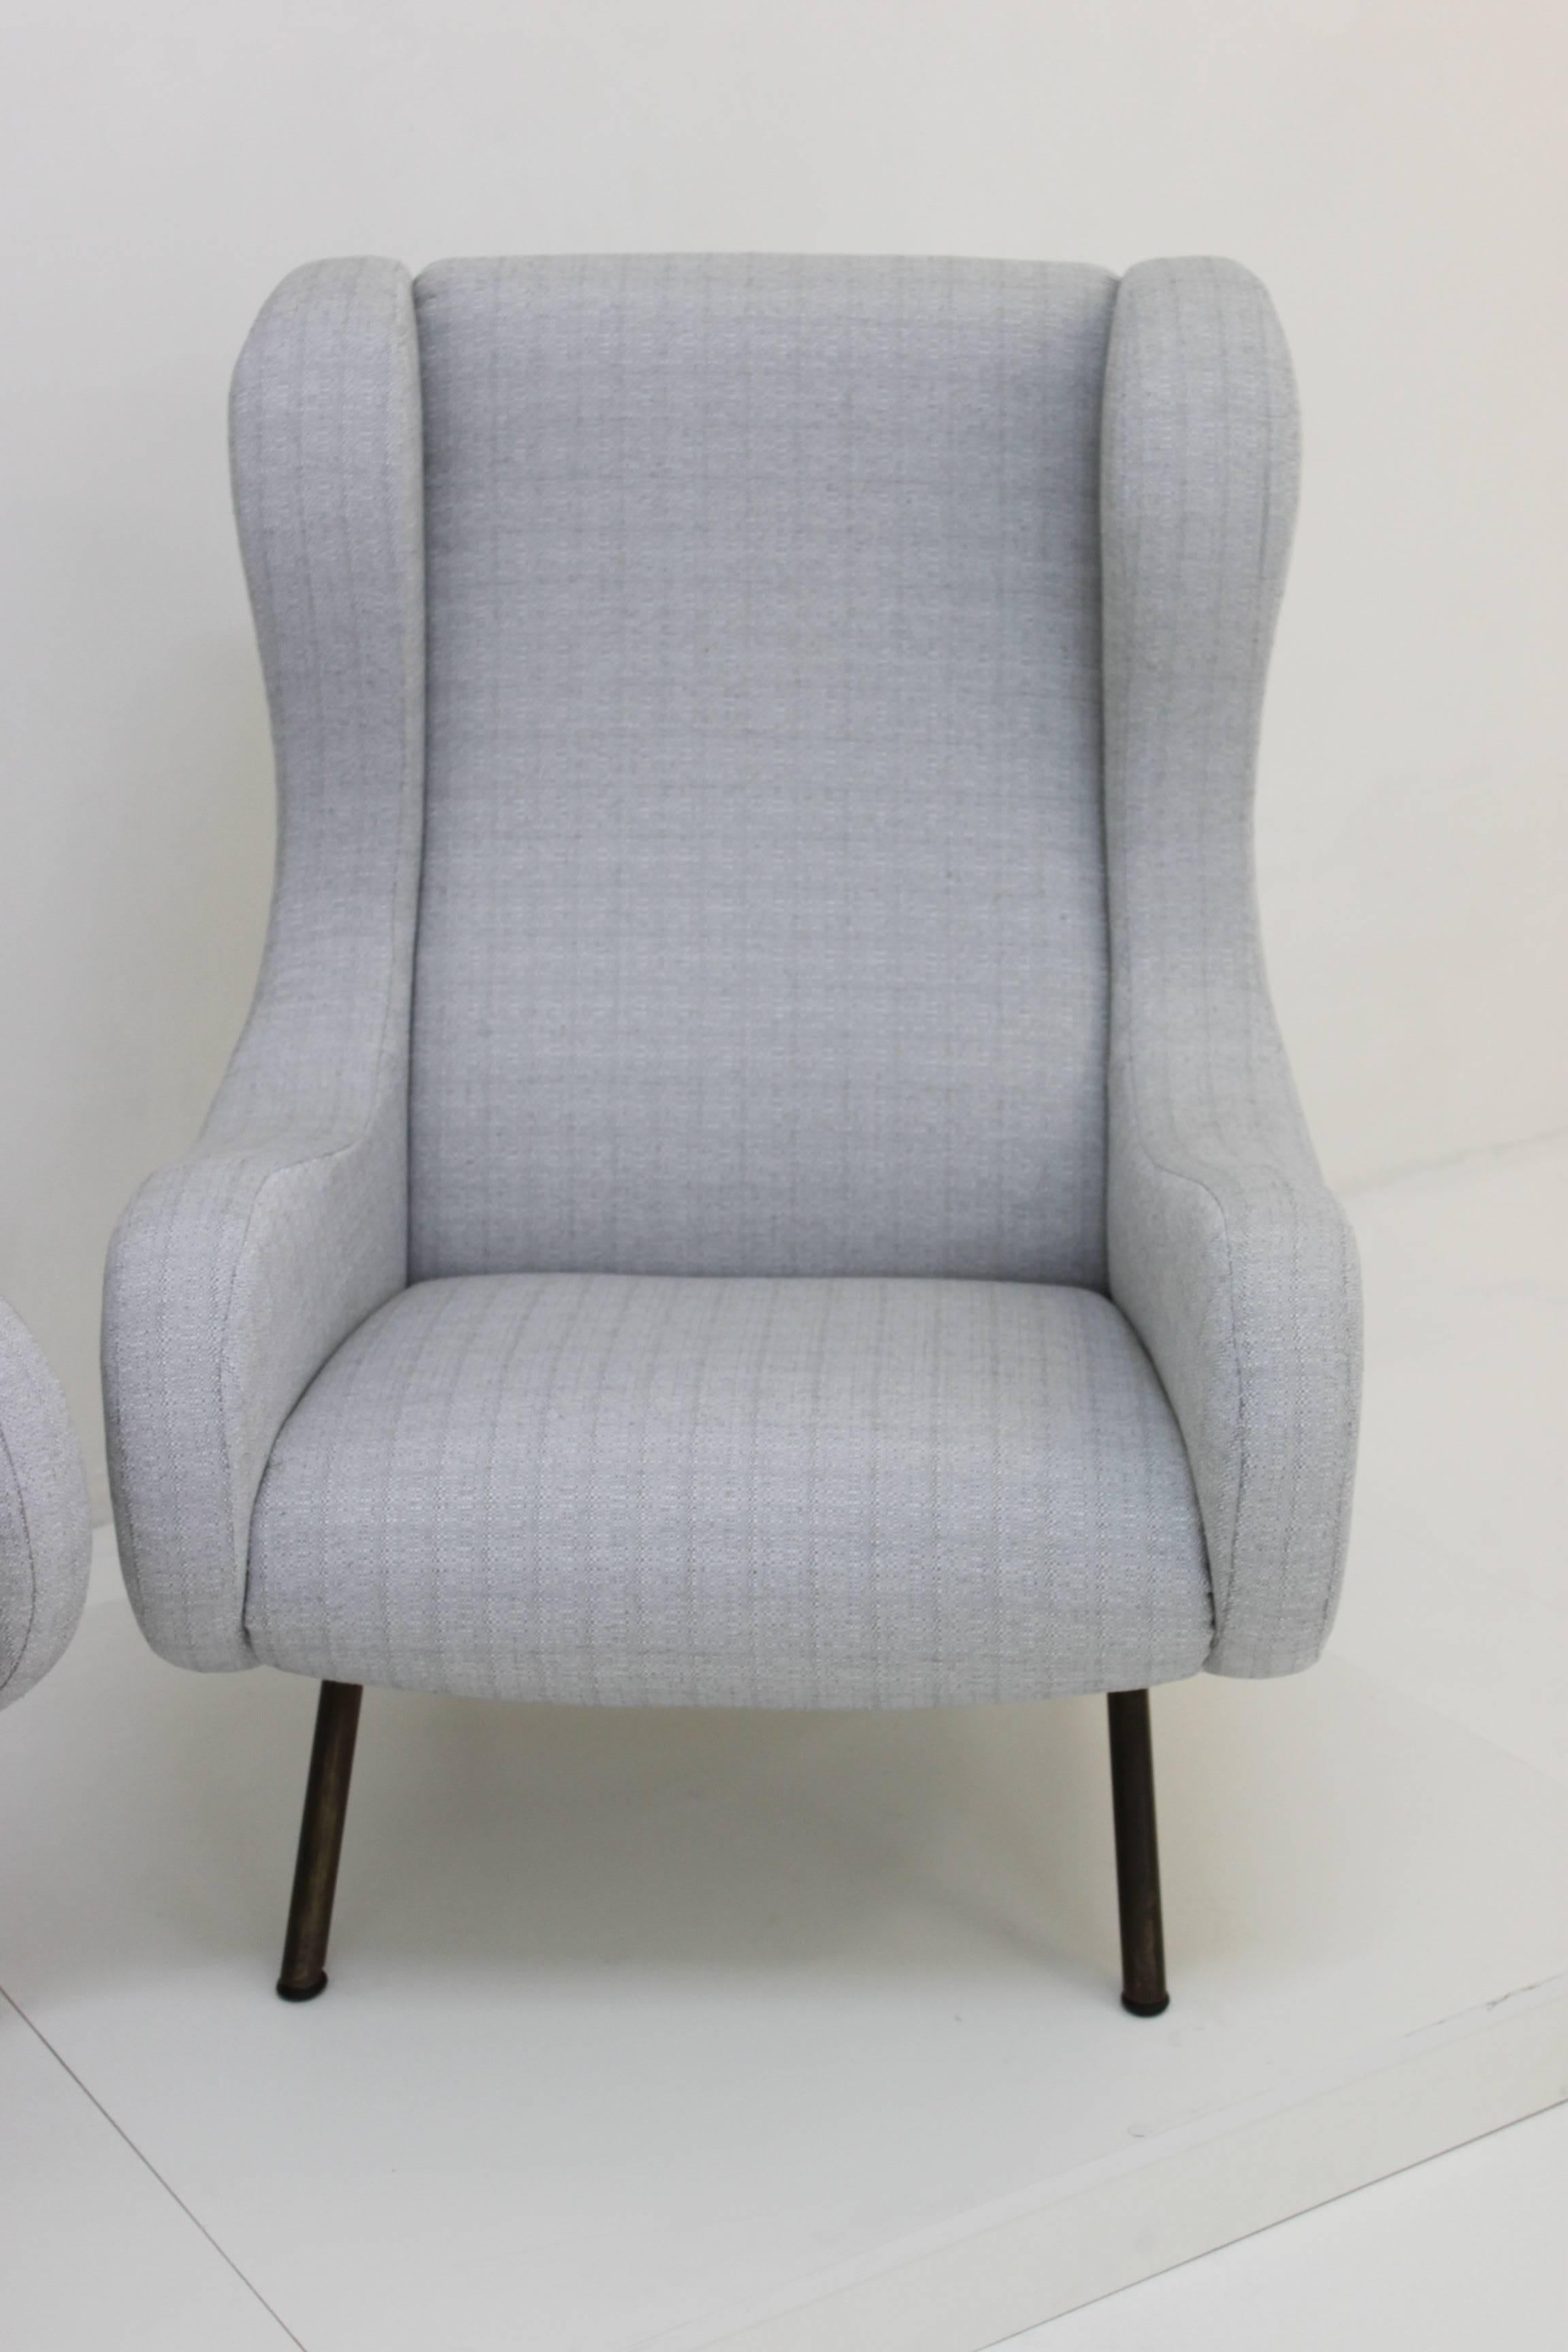 Beautifully designed armchairs in light grey cloth material.
Senior Model.
Arflex production.
Published in the book 